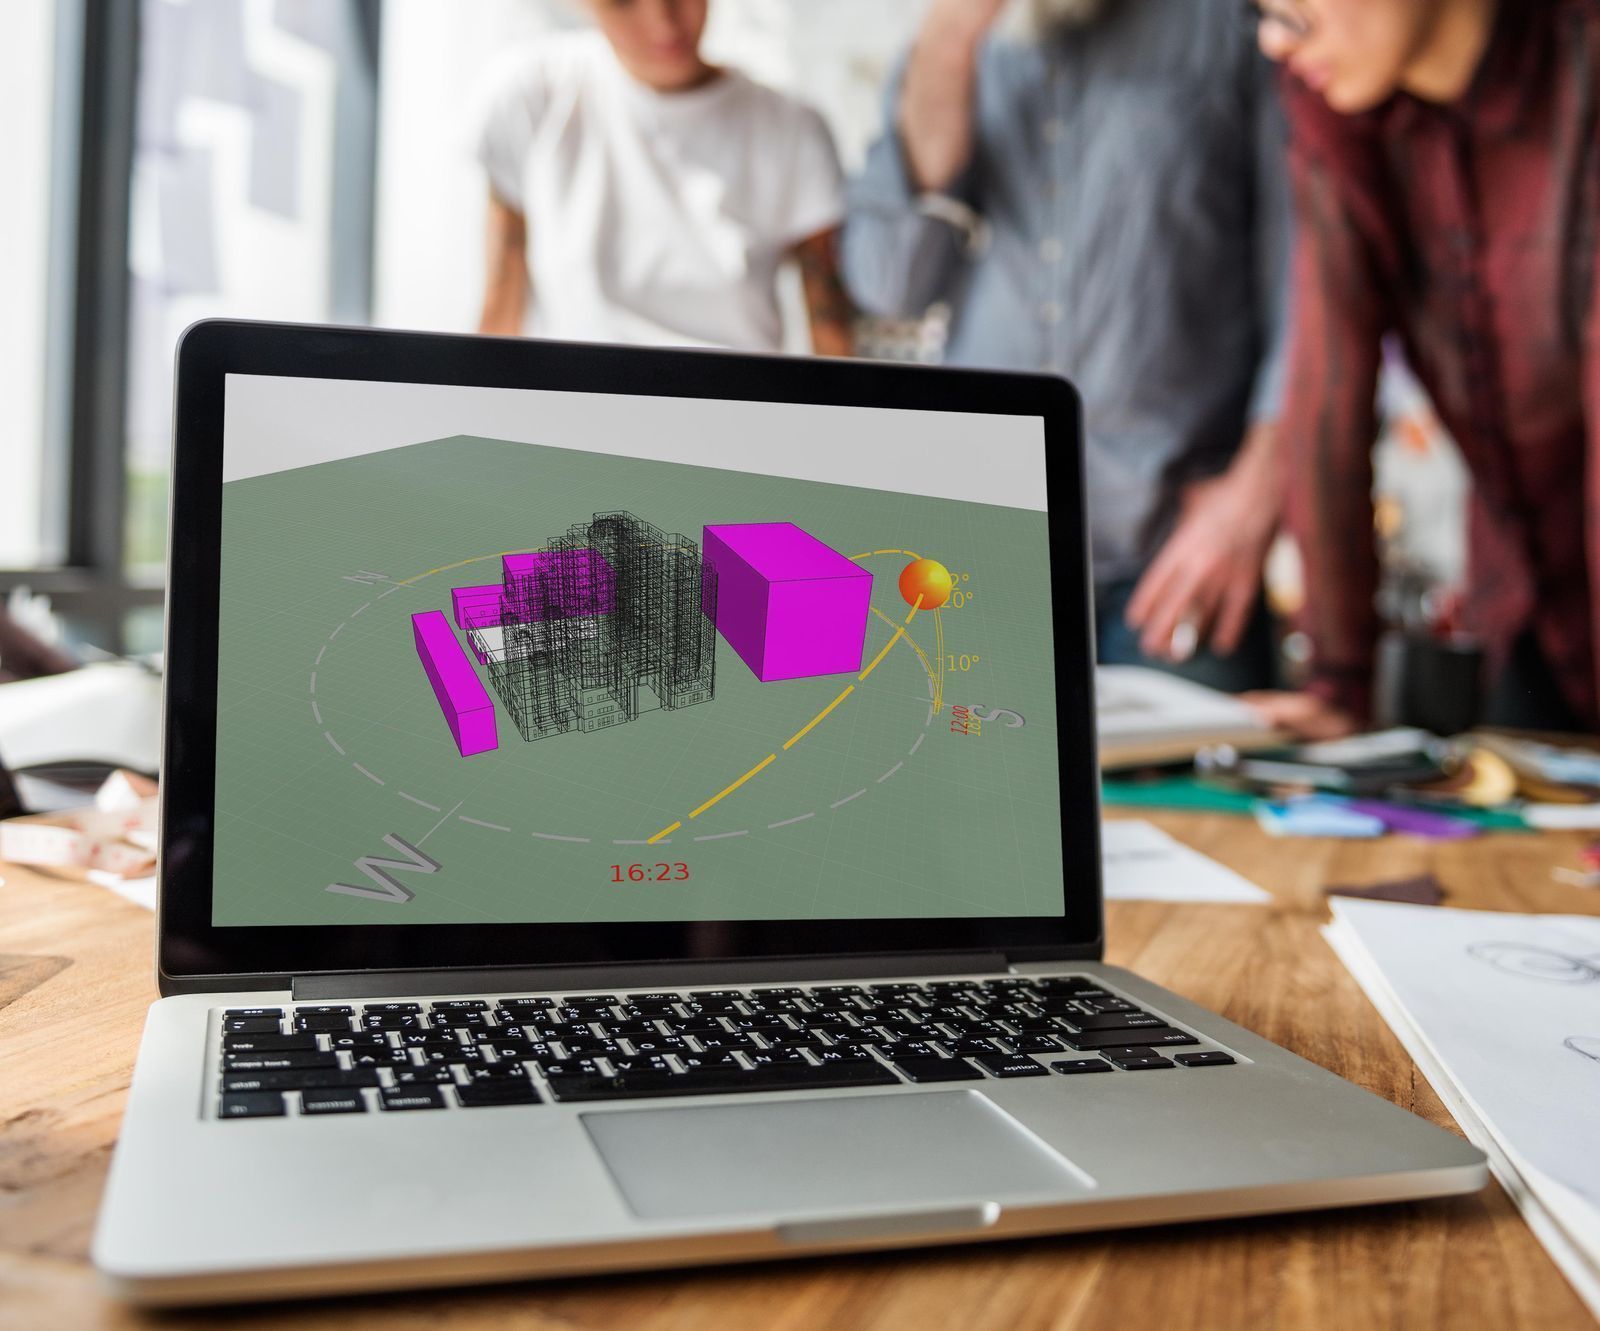 An open laptop displays a digital building model showing the path of the sun around a building. Behind the laptop three people stand around the table, blurred out. 